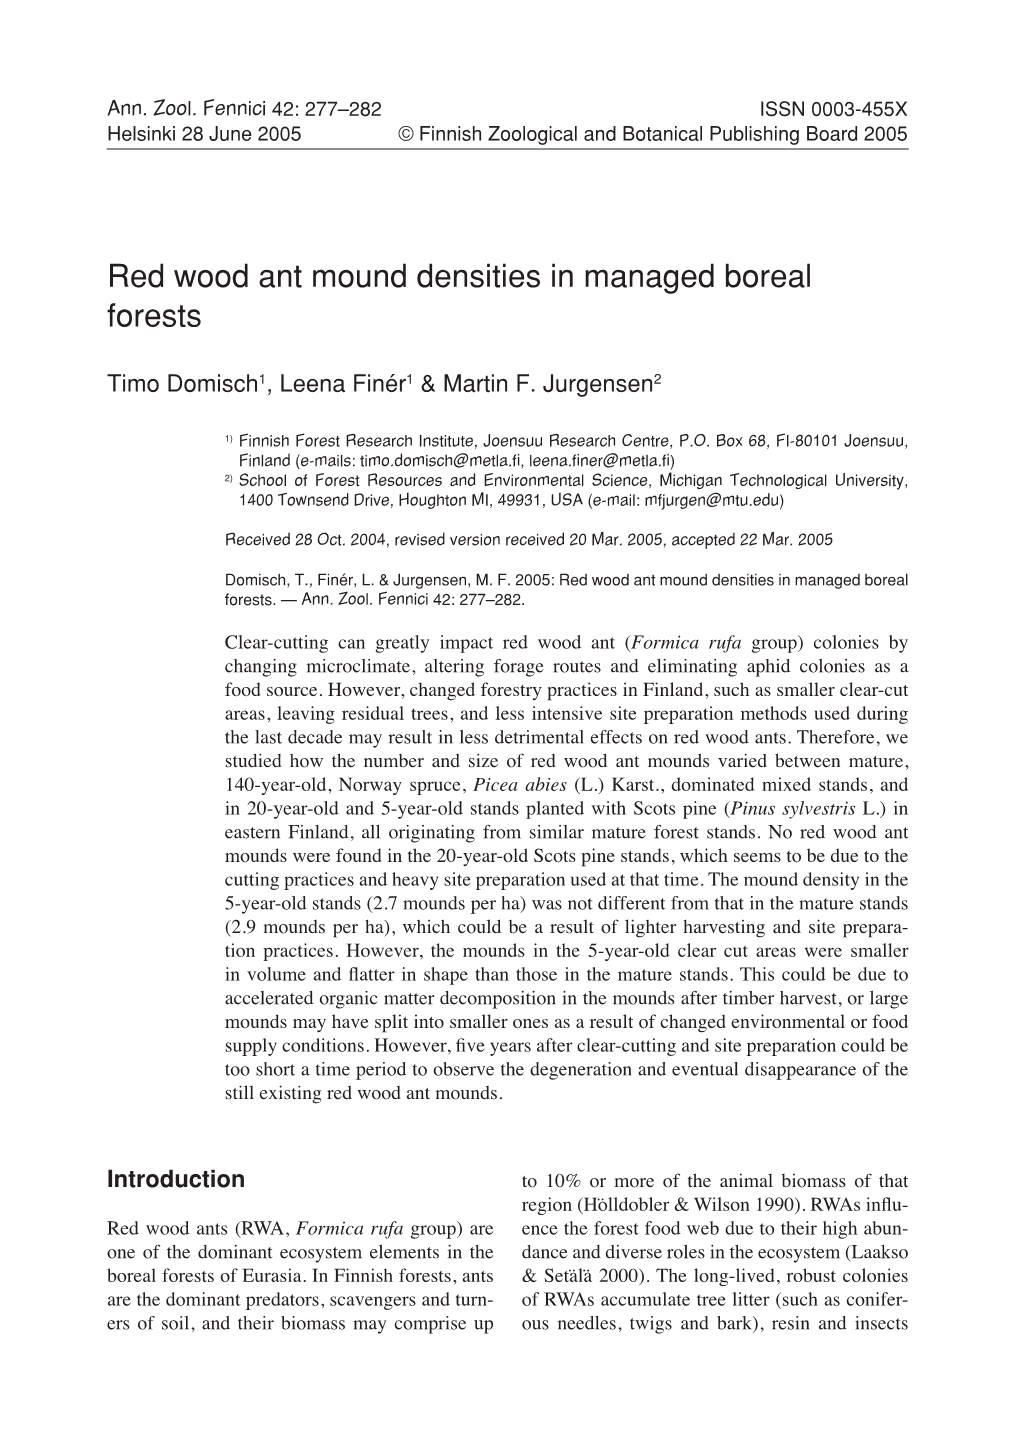 Red Wood Ant Mound Densities in Managed Boreal Forests